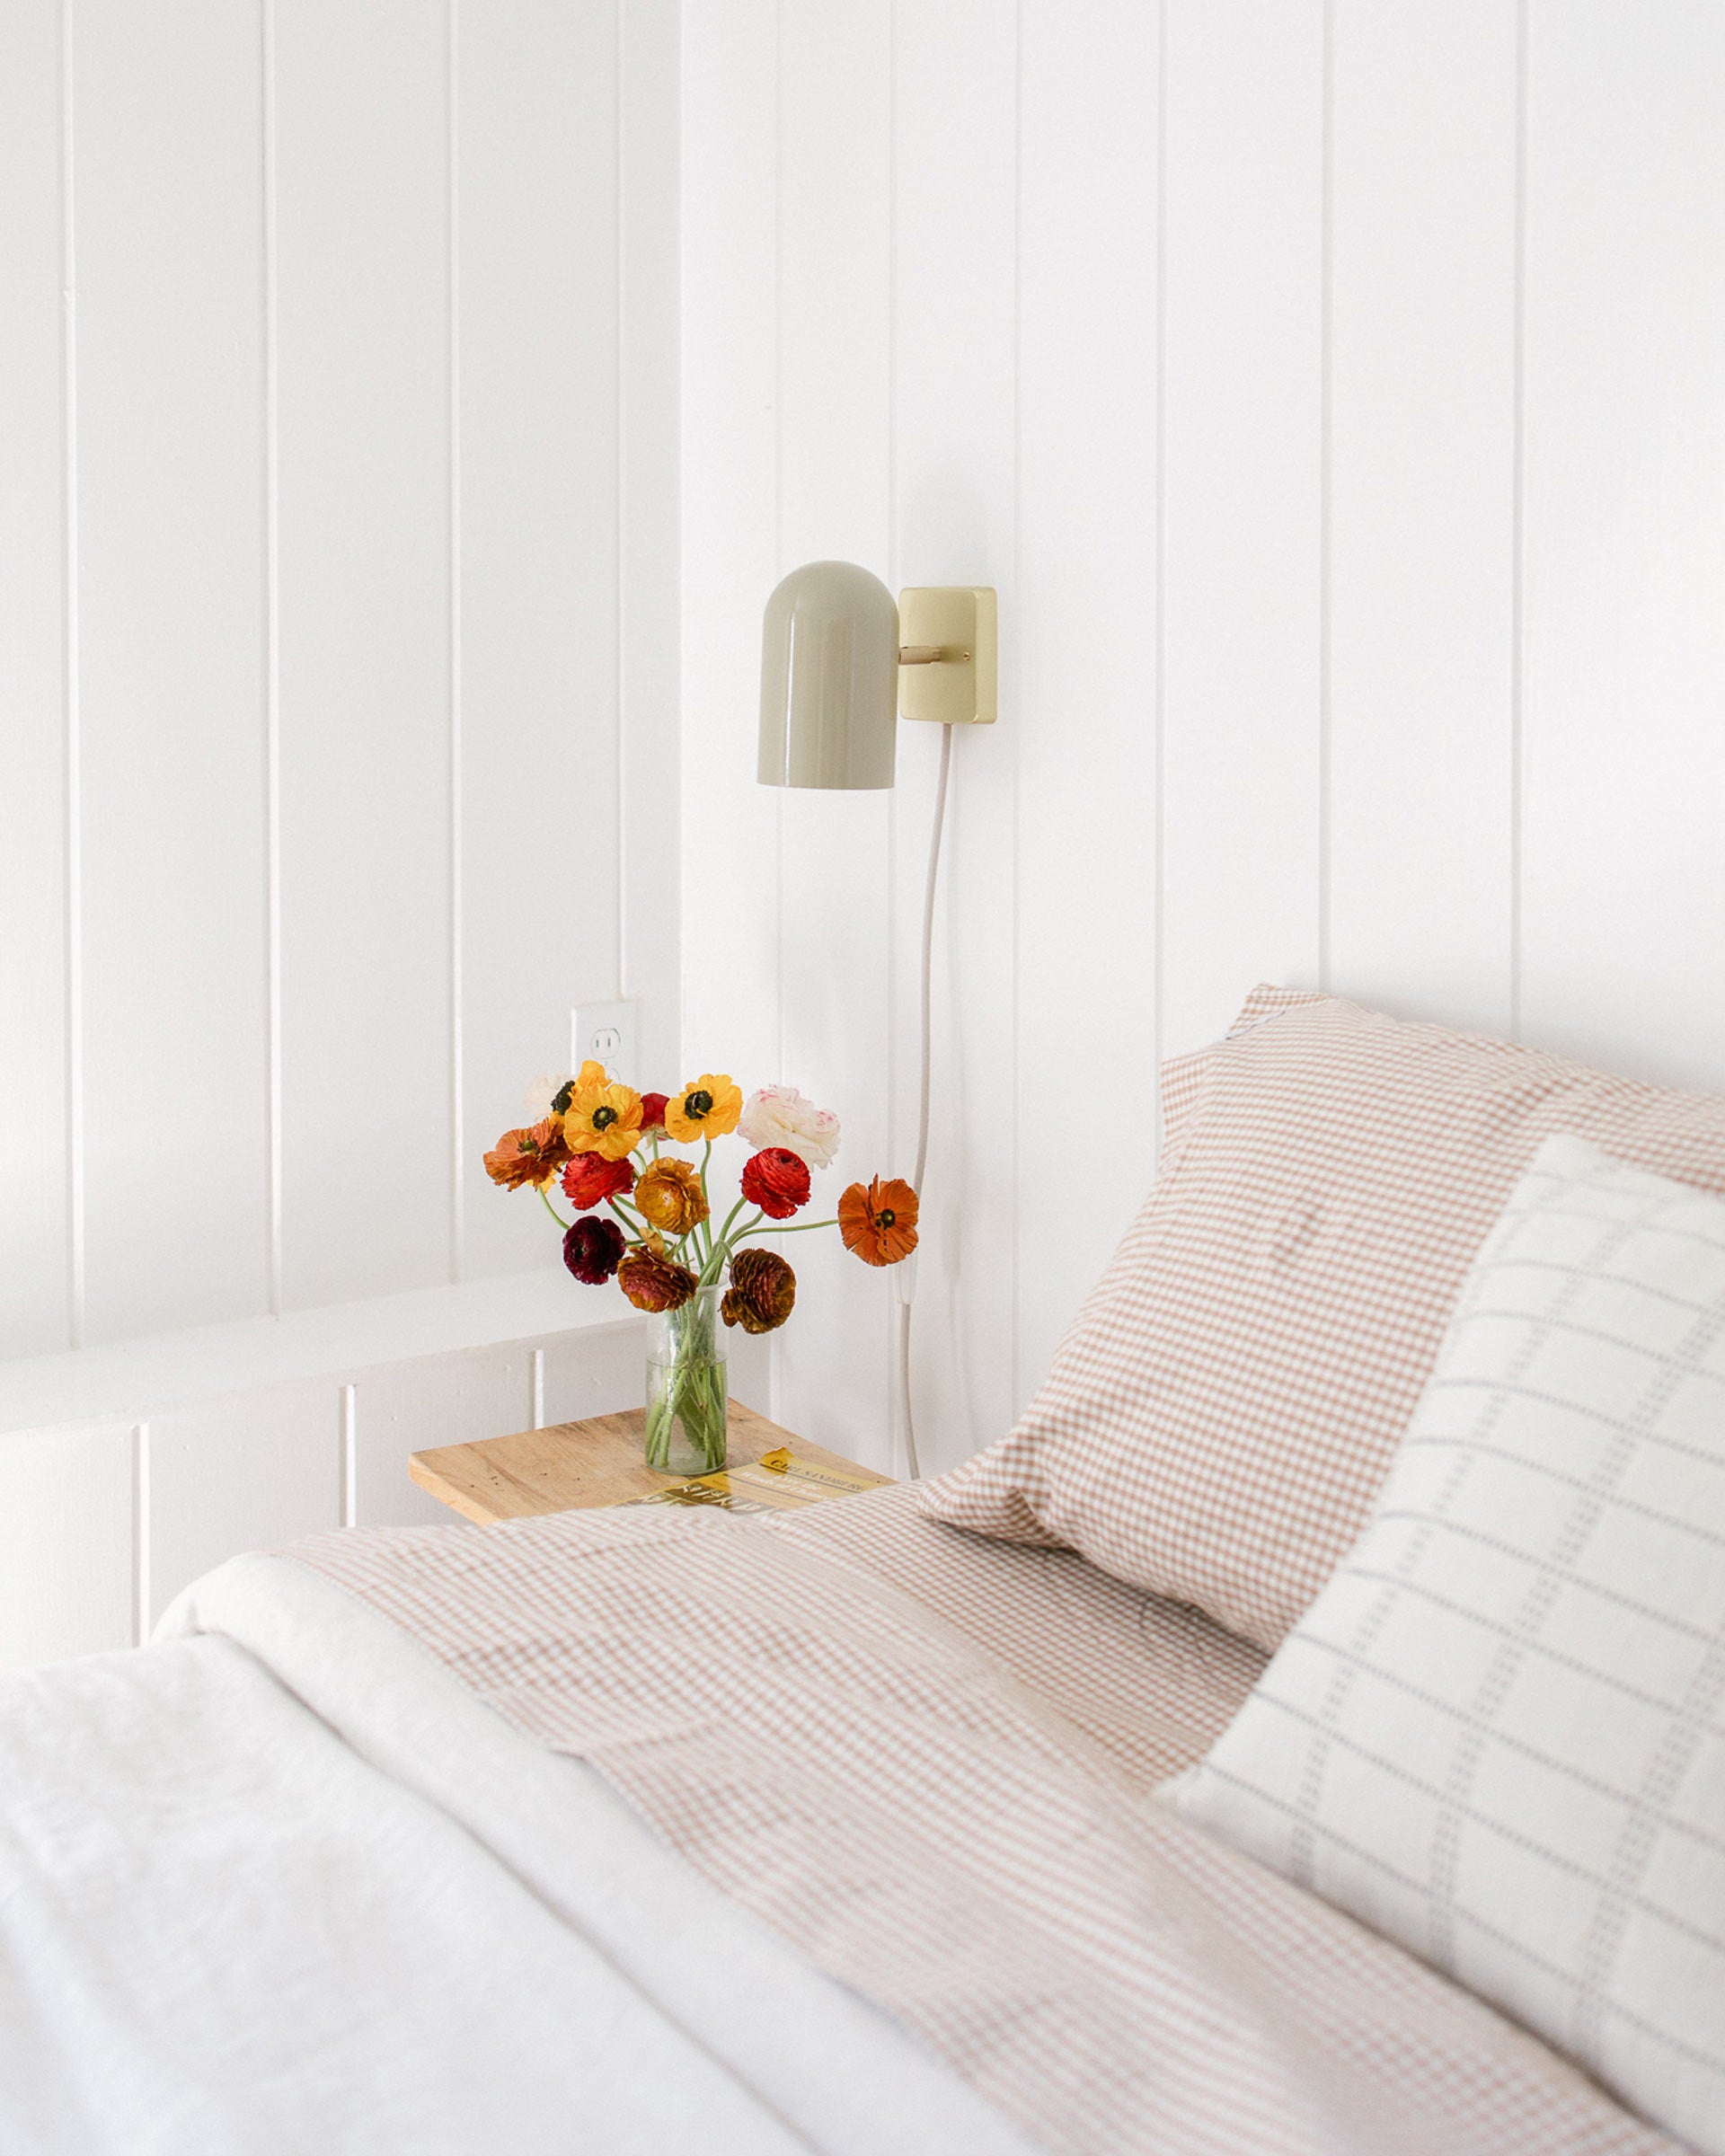 The Allegheny plug-in wall sconce in a bedroom.